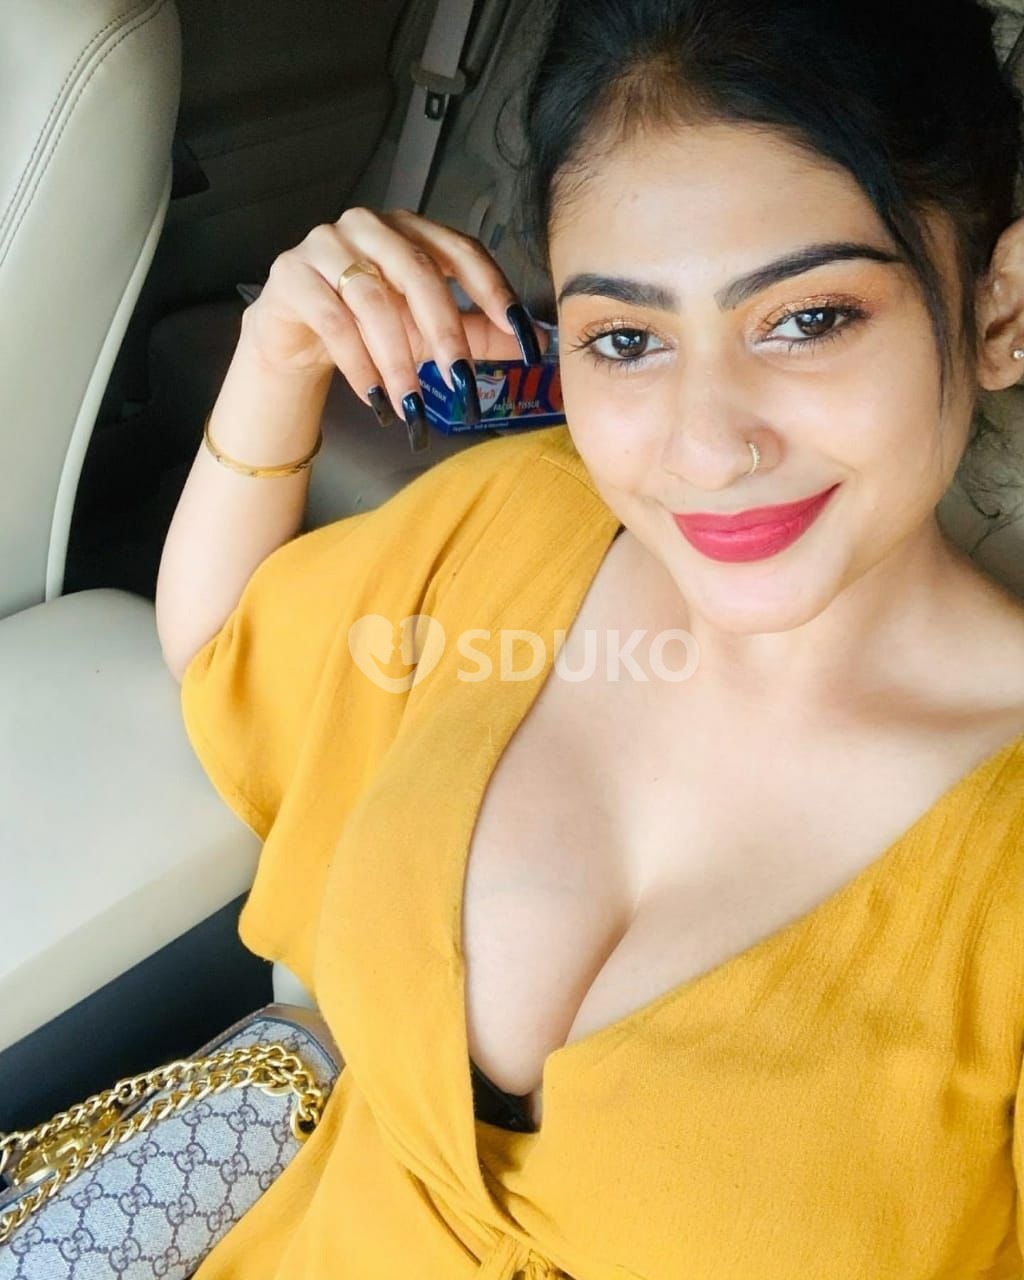 Kothrud 92564/71656 now available call girl full safe and secure without condom sucking kissing all services